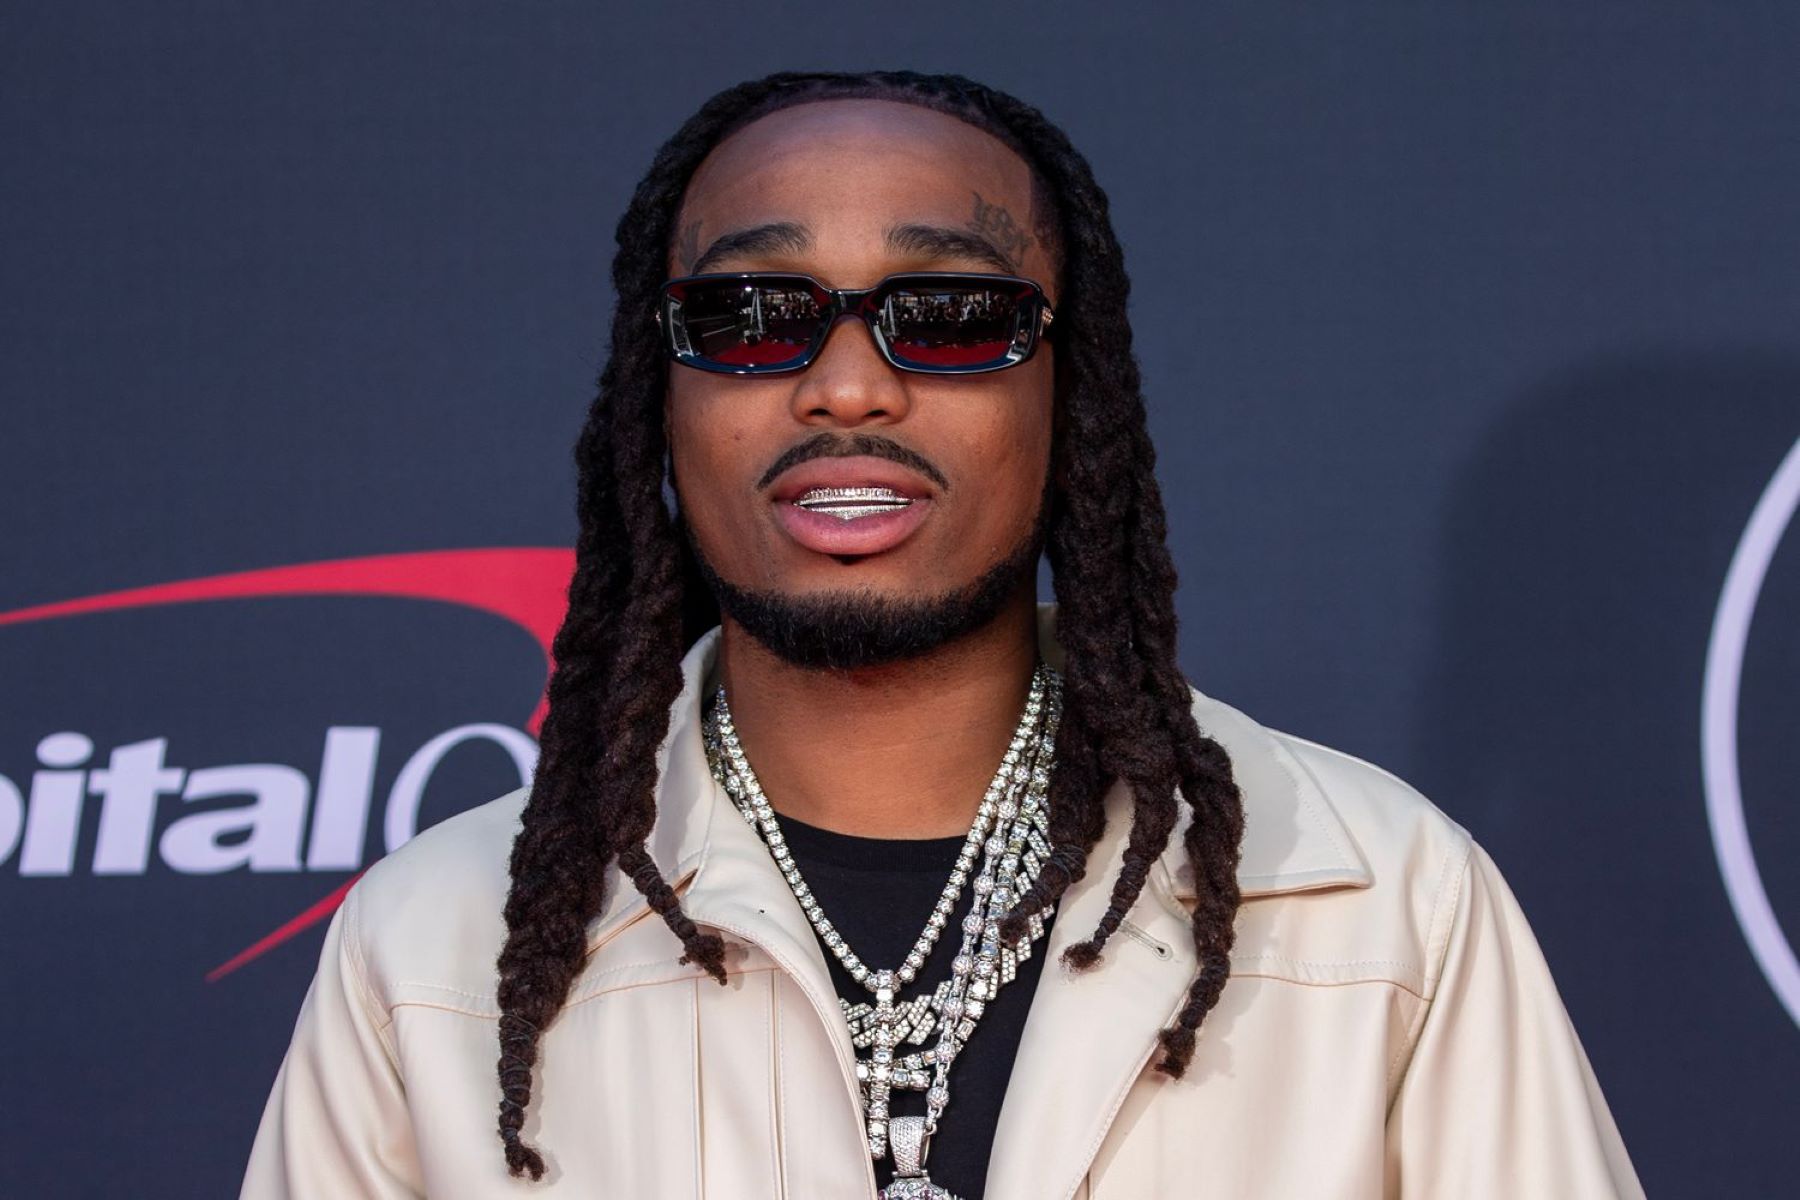 quavo-takes-on-capitol-hill-to-address-gun-violence-in-honor-of-takeoff